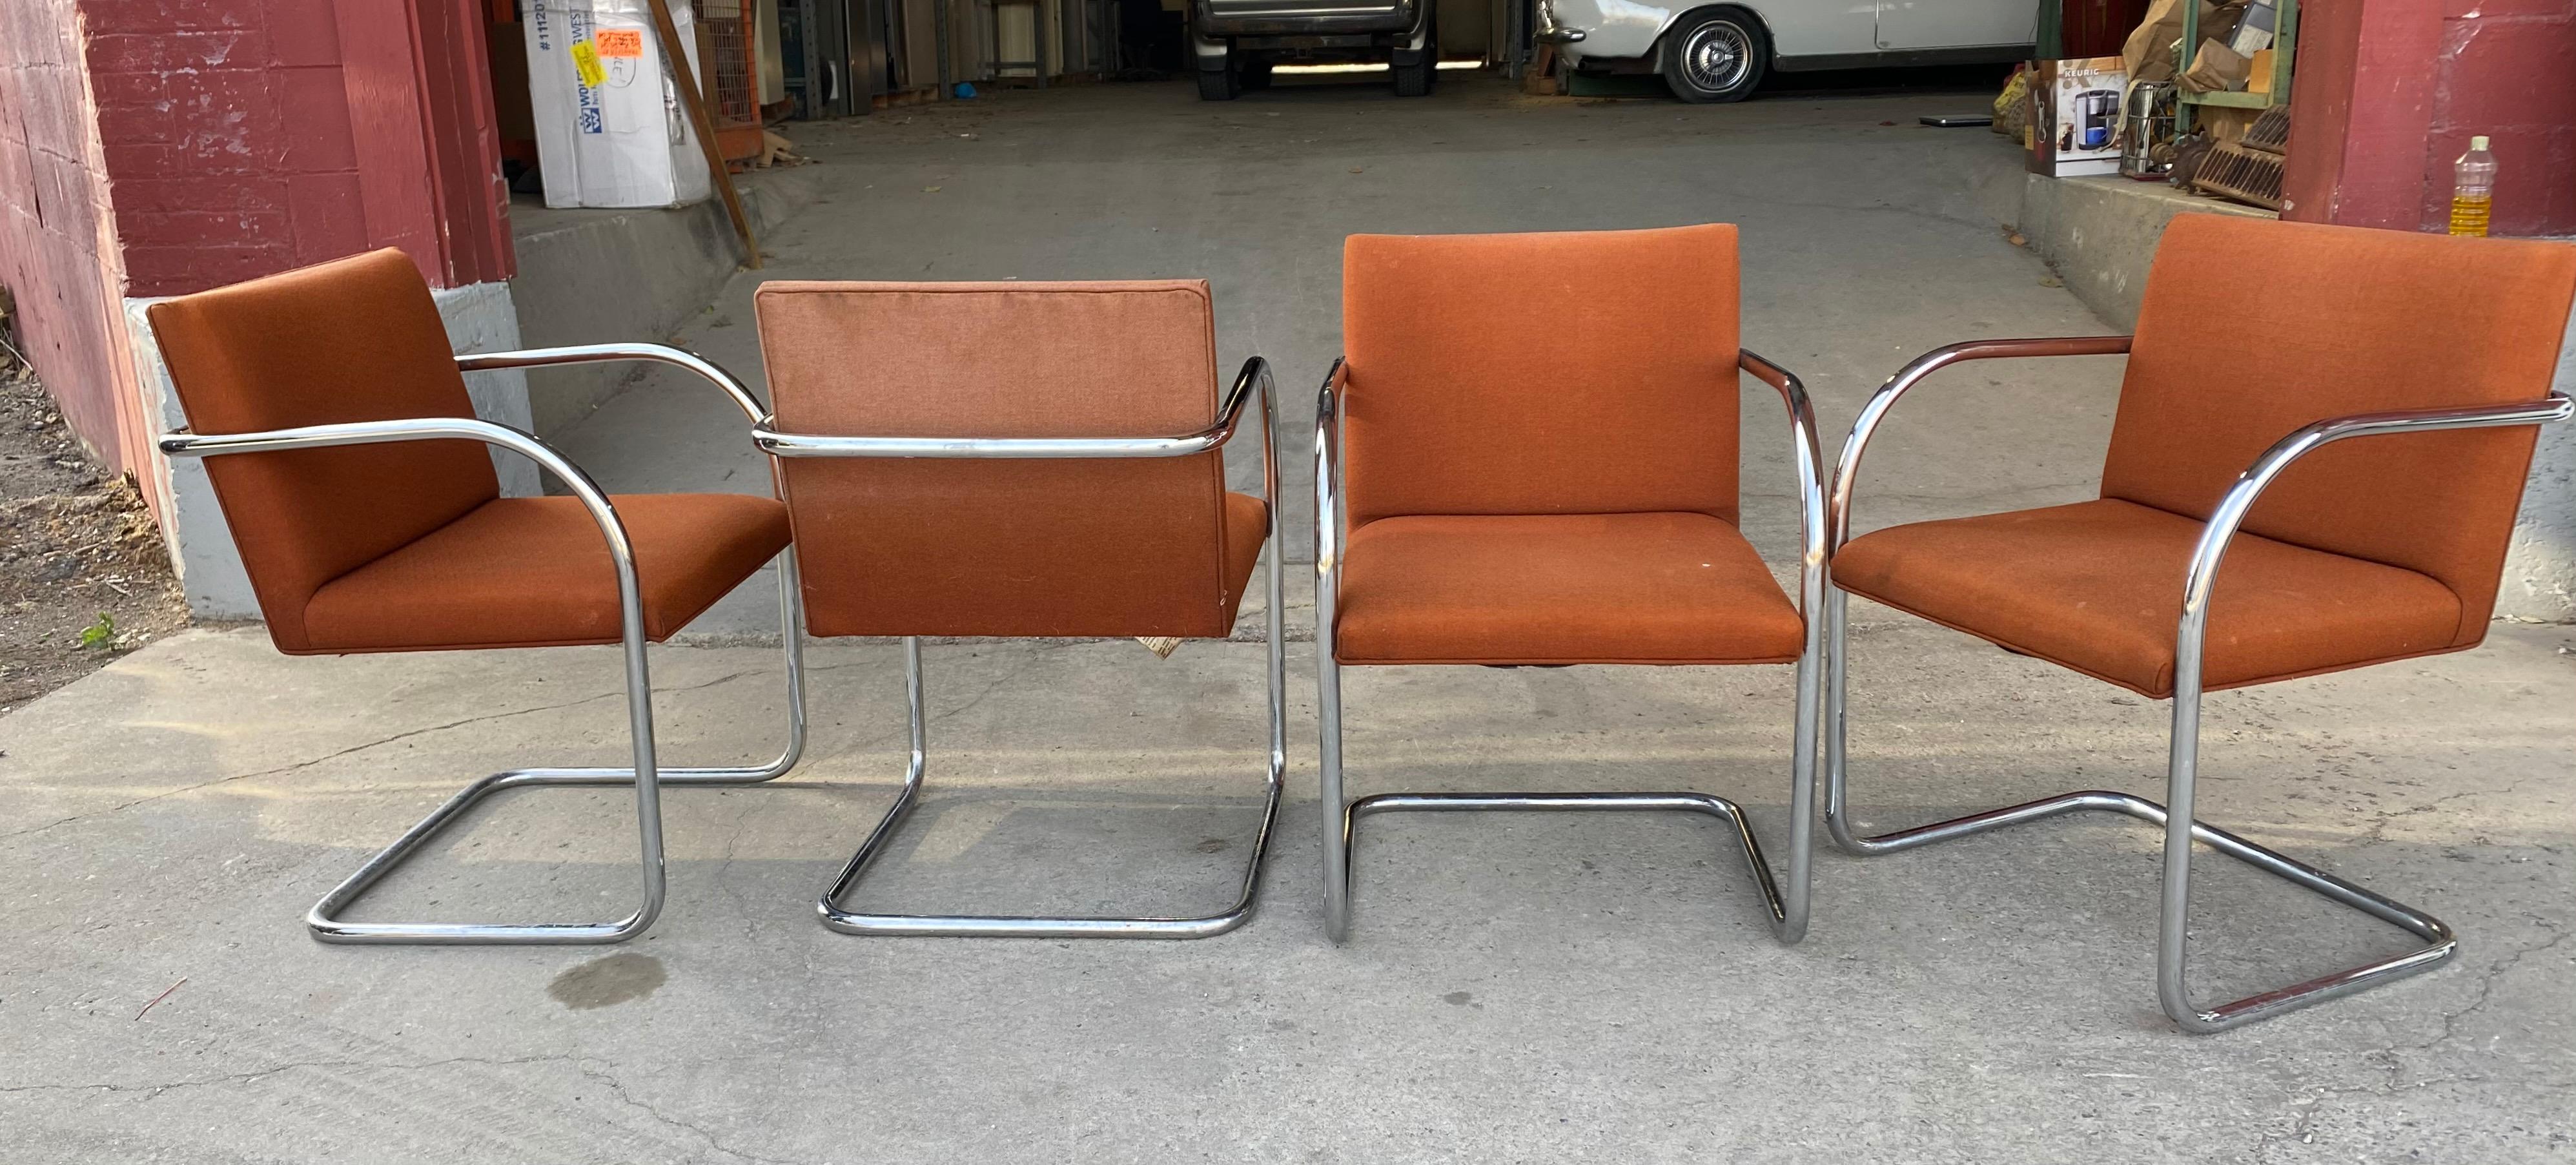 Late 20th Century Classic Midcentury Brno Chairs by Mies van der Rohe for Gordon International For Sale